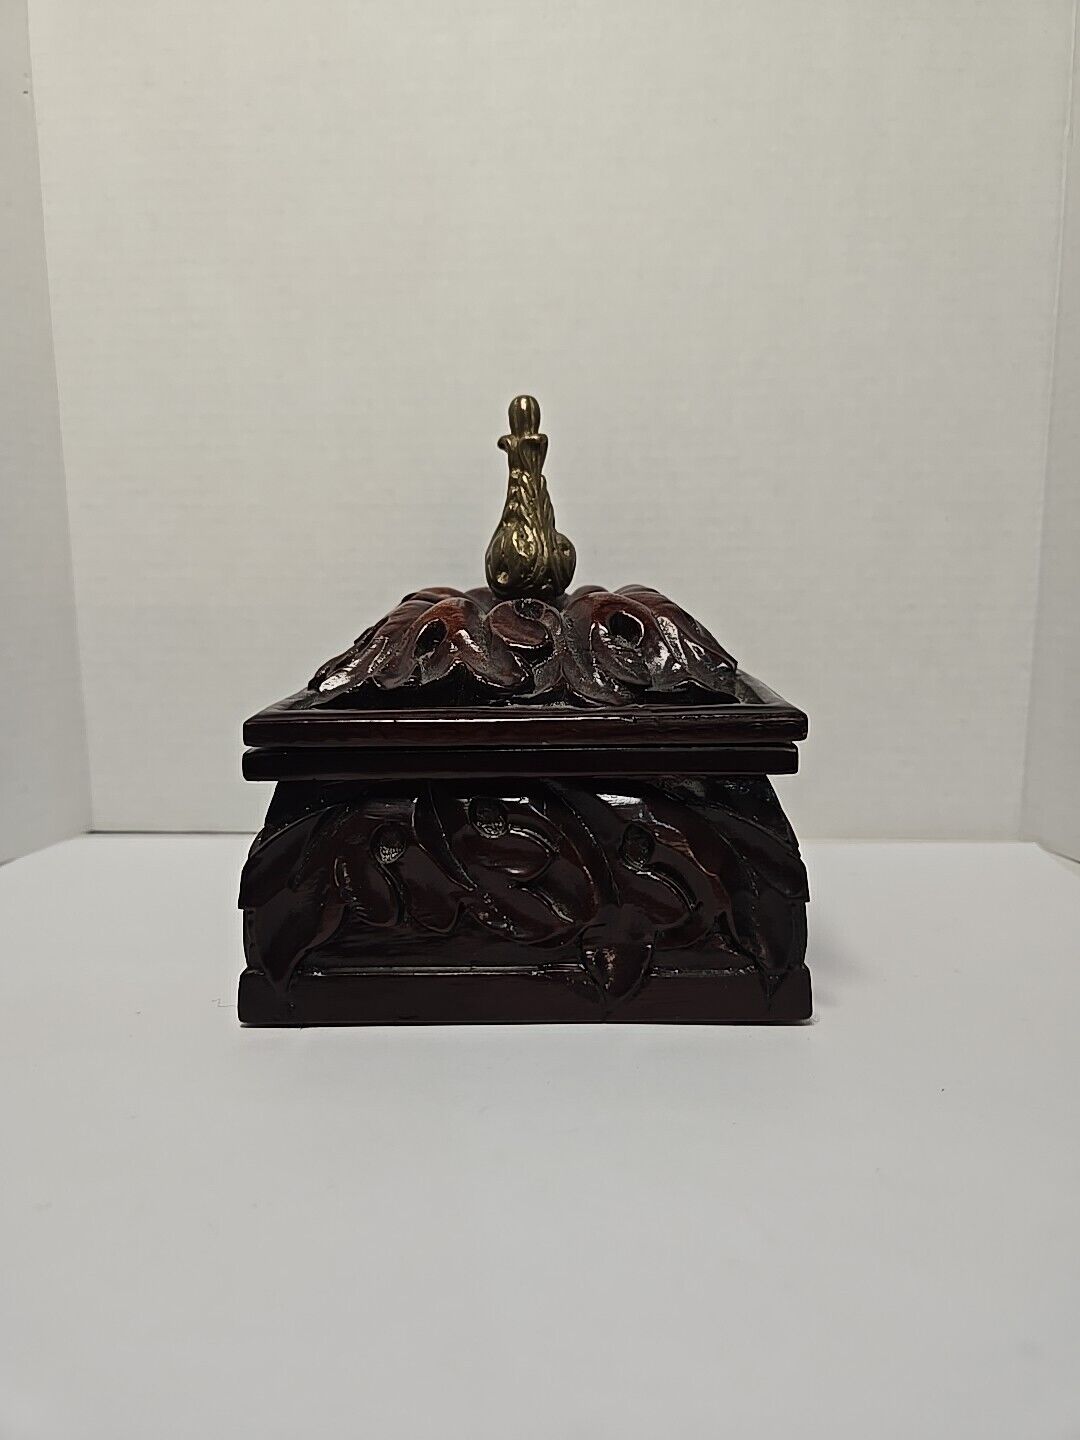 Vintage 2000 Bombay Co Ornate Dark Wood Hand Carved Jewelry Trinket Box With Lid